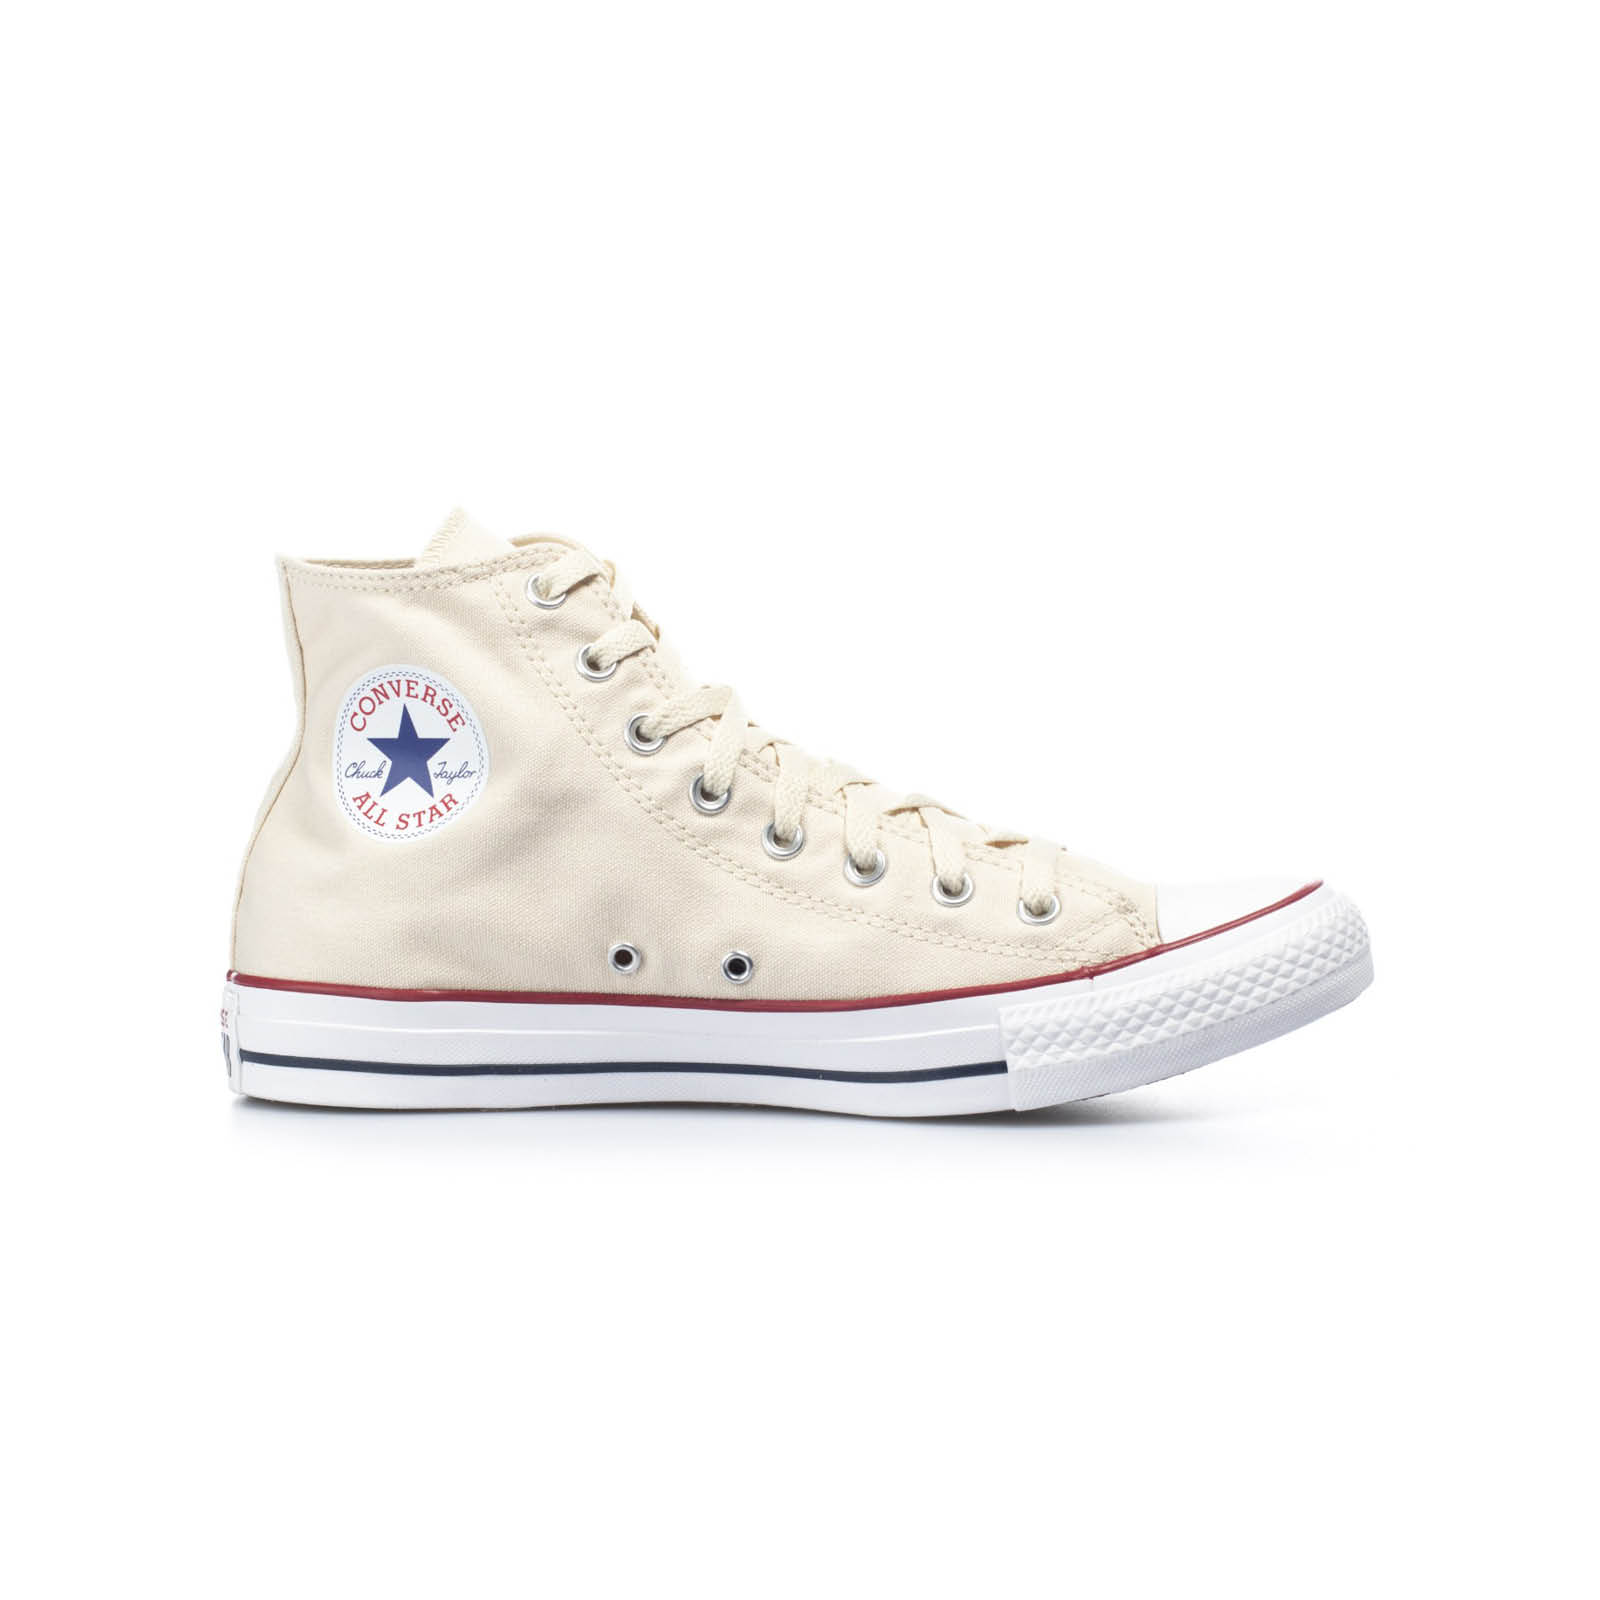 Converse - CHUCK TAYLOR ALL STAR - 101-NATURAL IVORY Ανδρικά > Παπούτσια > Sneaker > Μποτάκι High Cut